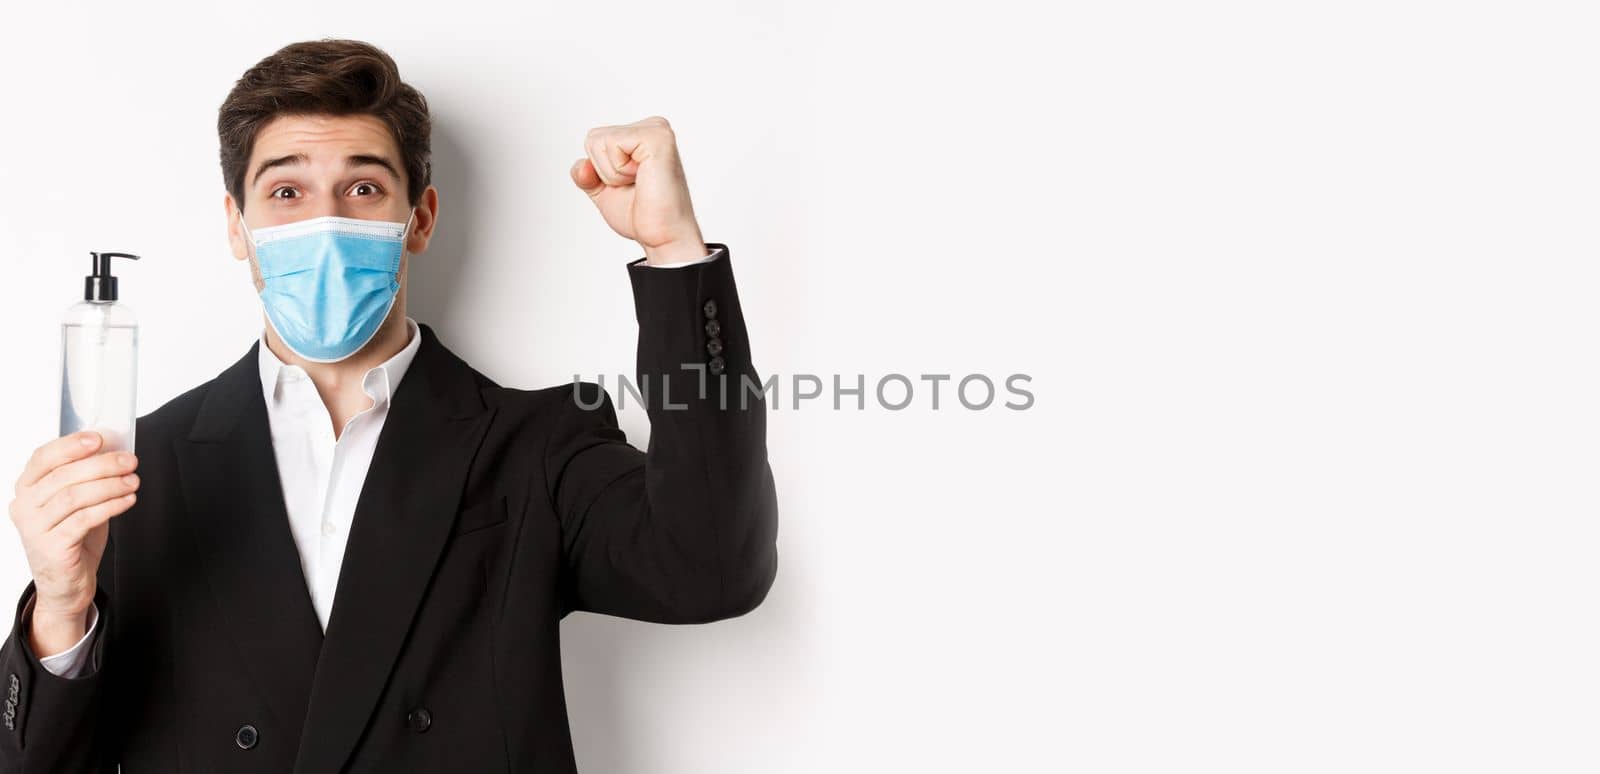 Concept of covid-19, business and social distancing. Close-up of happy man in trendy suit and medical mask, cheering and raising hand up, showing hand sanitizer, white background.